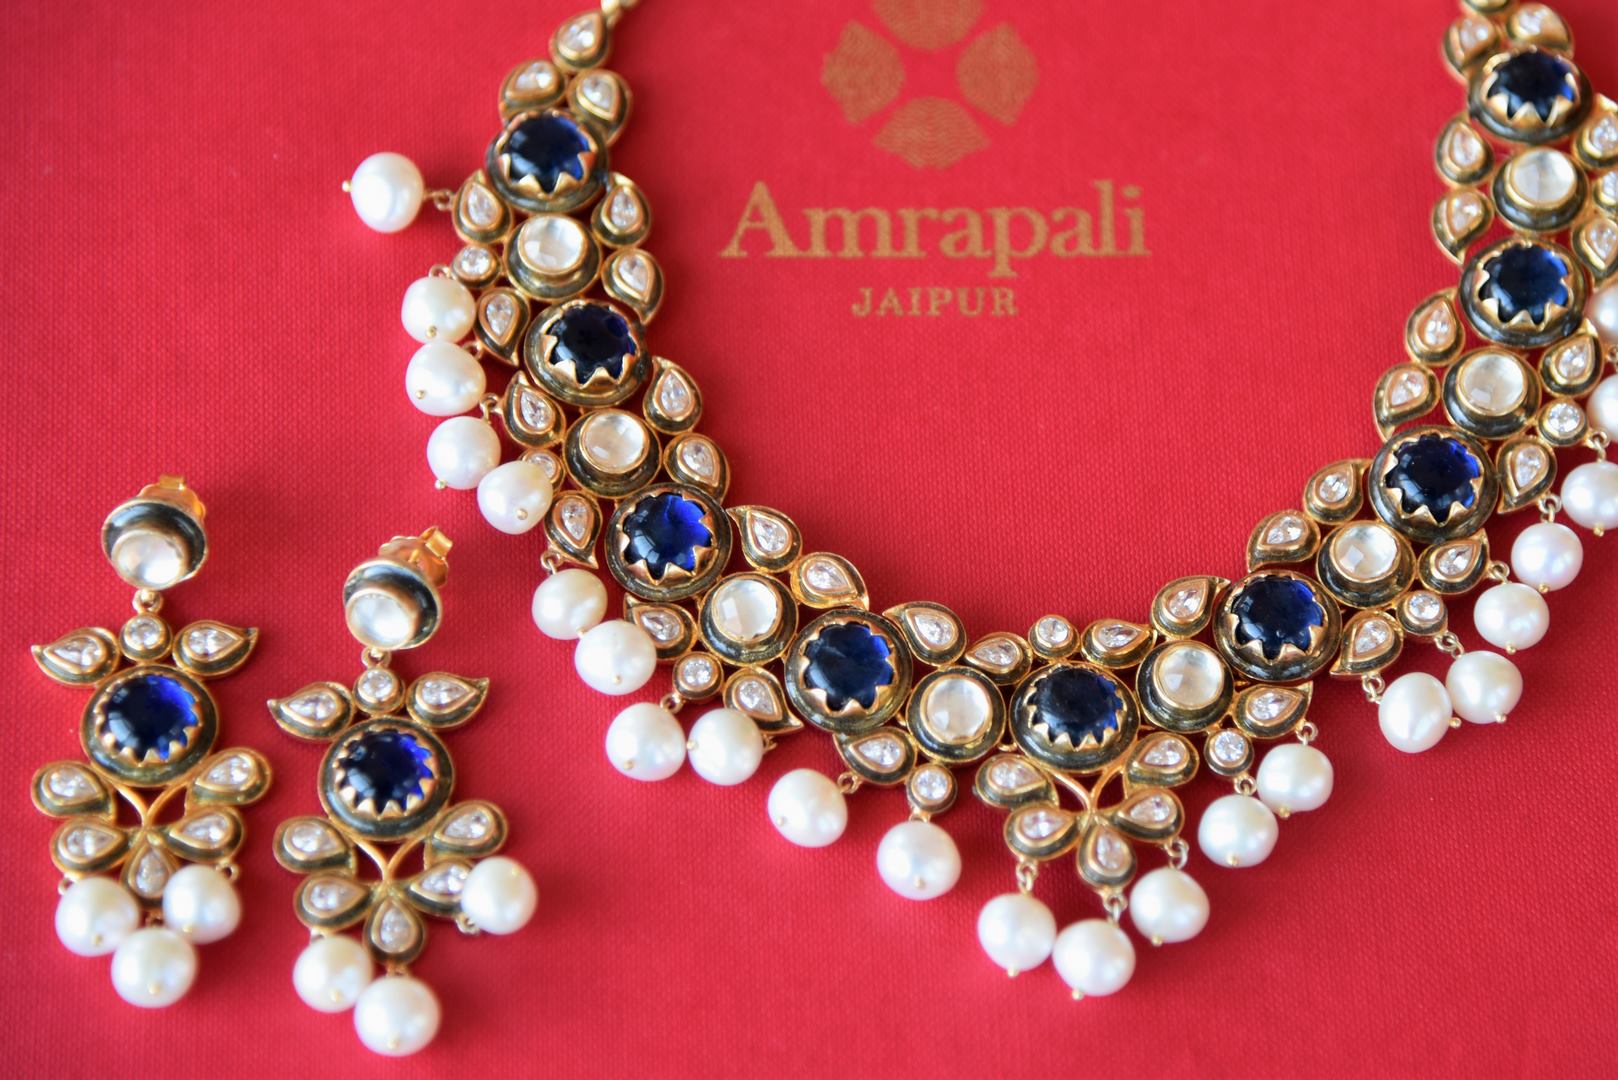 Buy silver gold plated Amrapali glass and pearl necklace set with earrings online in USA. Add spark to your ethnic attires with beautiful Indian jewelry, wedding jewelry, silver gold plated necklaces from Pure Elegance Indian fashion store in USA.-flatlay